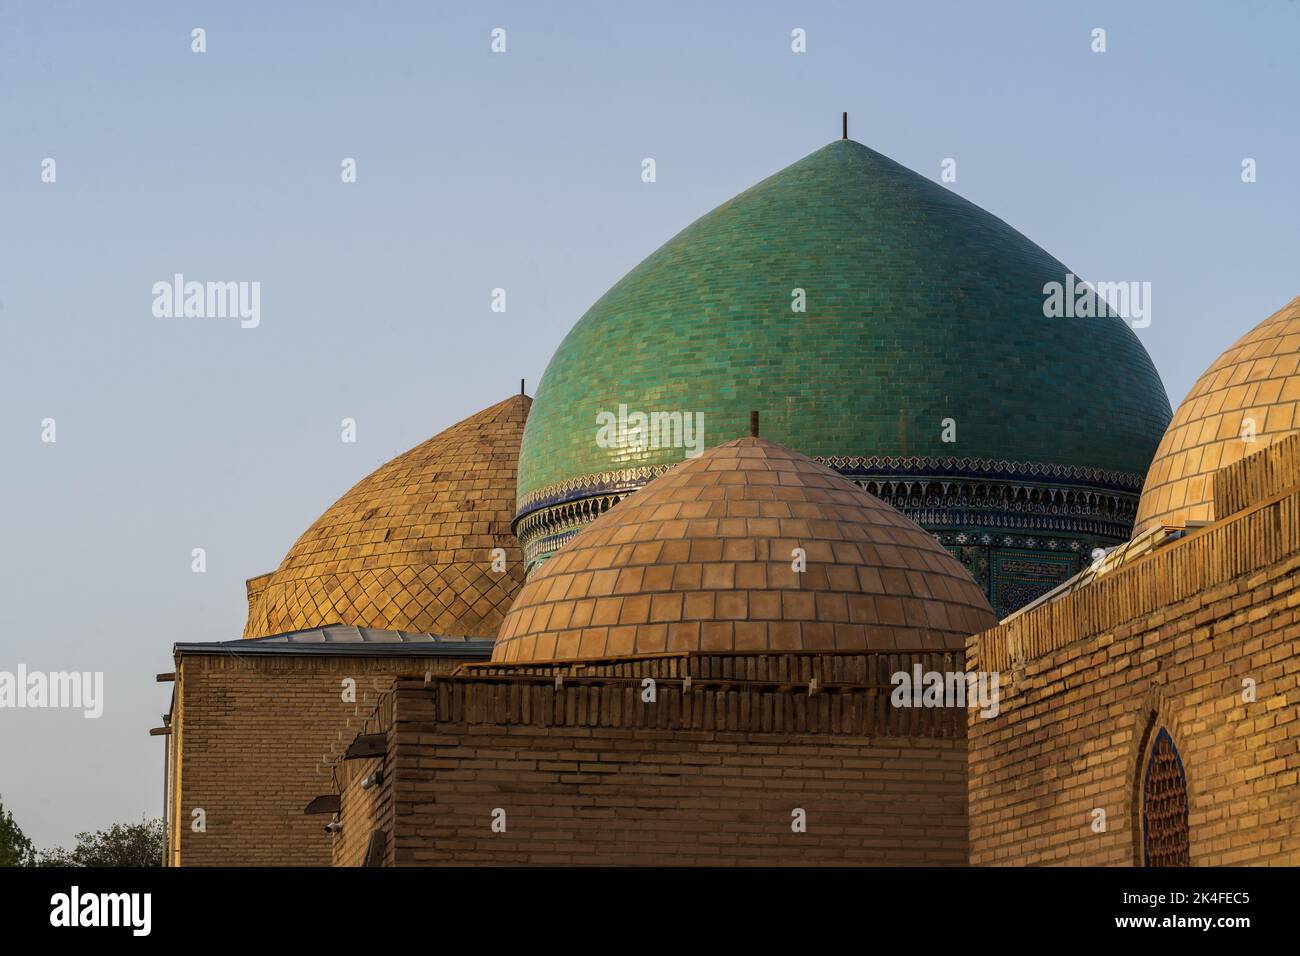 Green emerald dome and blue tiles of the Shah-i-Zinda mausoleum complex at sunset, Samarkand Stock Photo